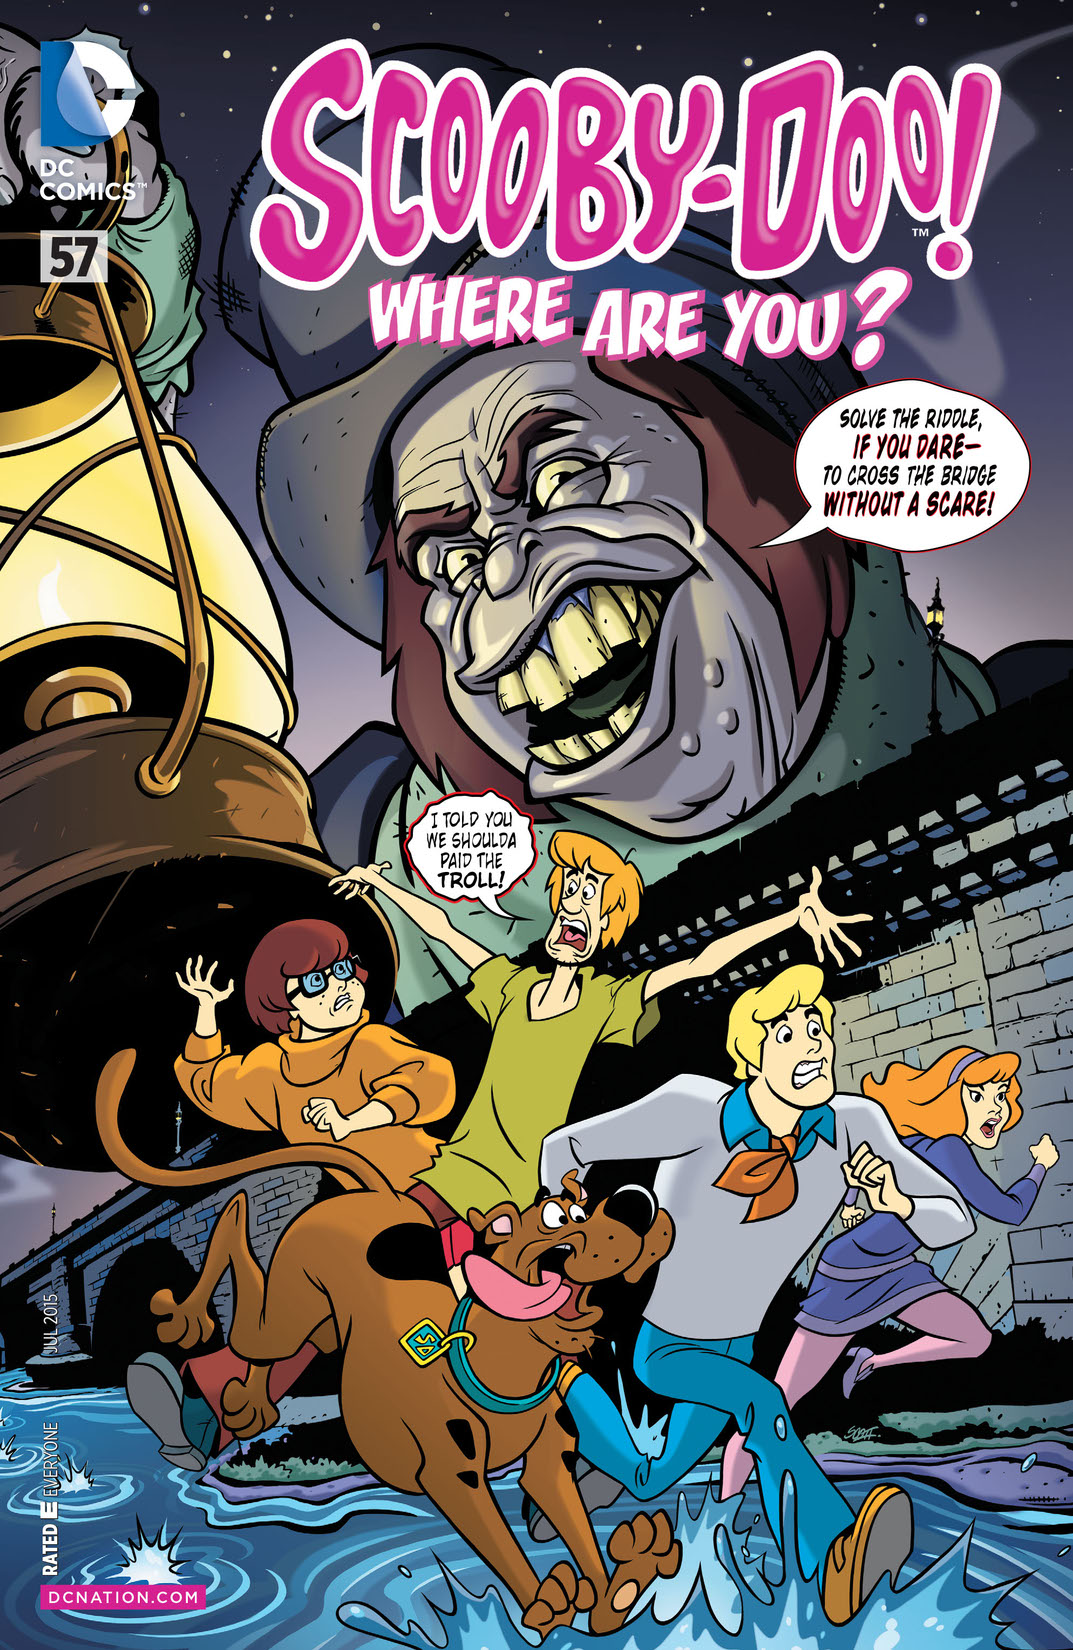 Scooby-Doo, Where Are You? #57 preview images